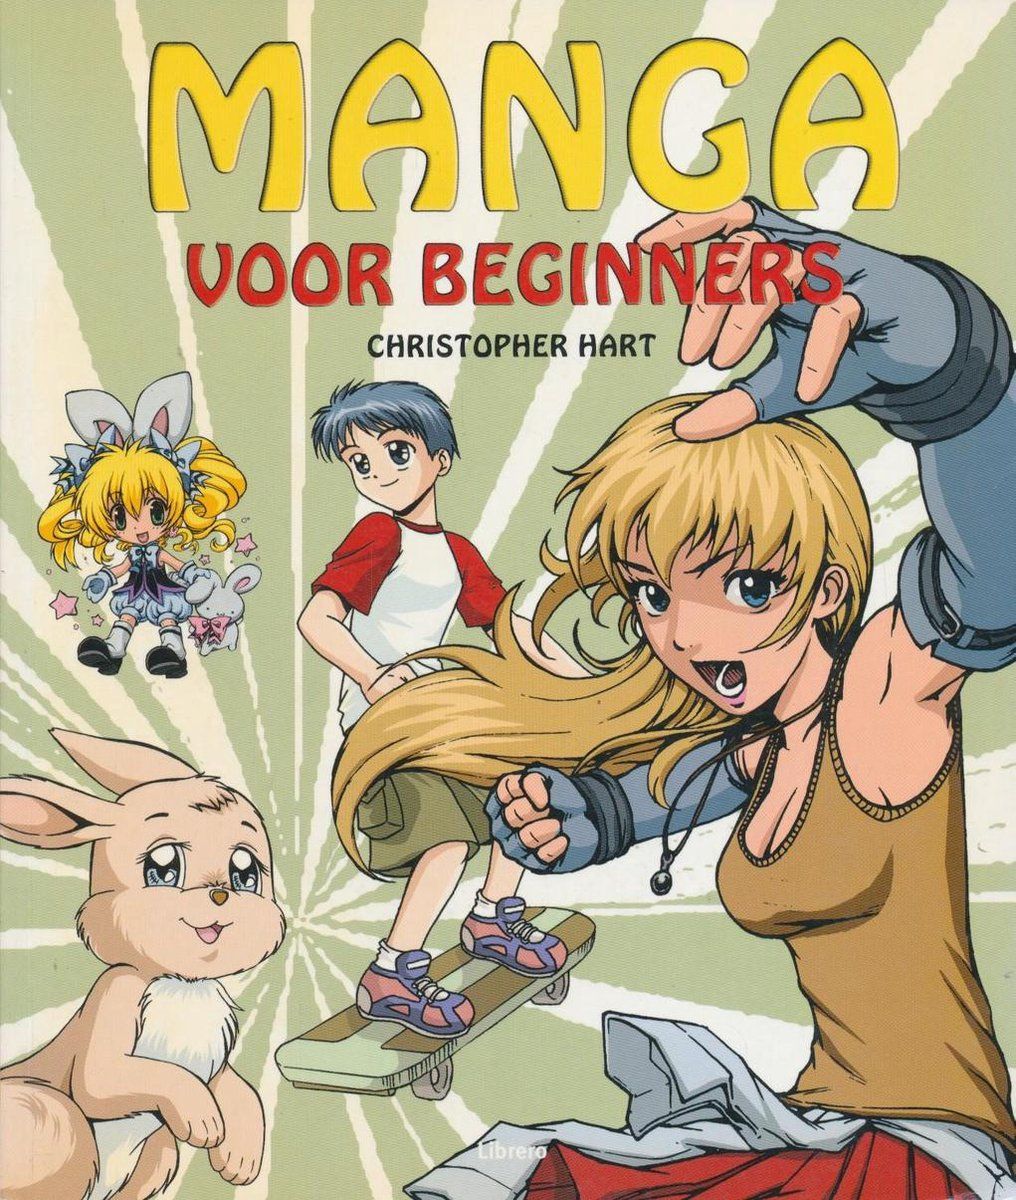 Manga for Beginners, by Christopher Hart. The original.